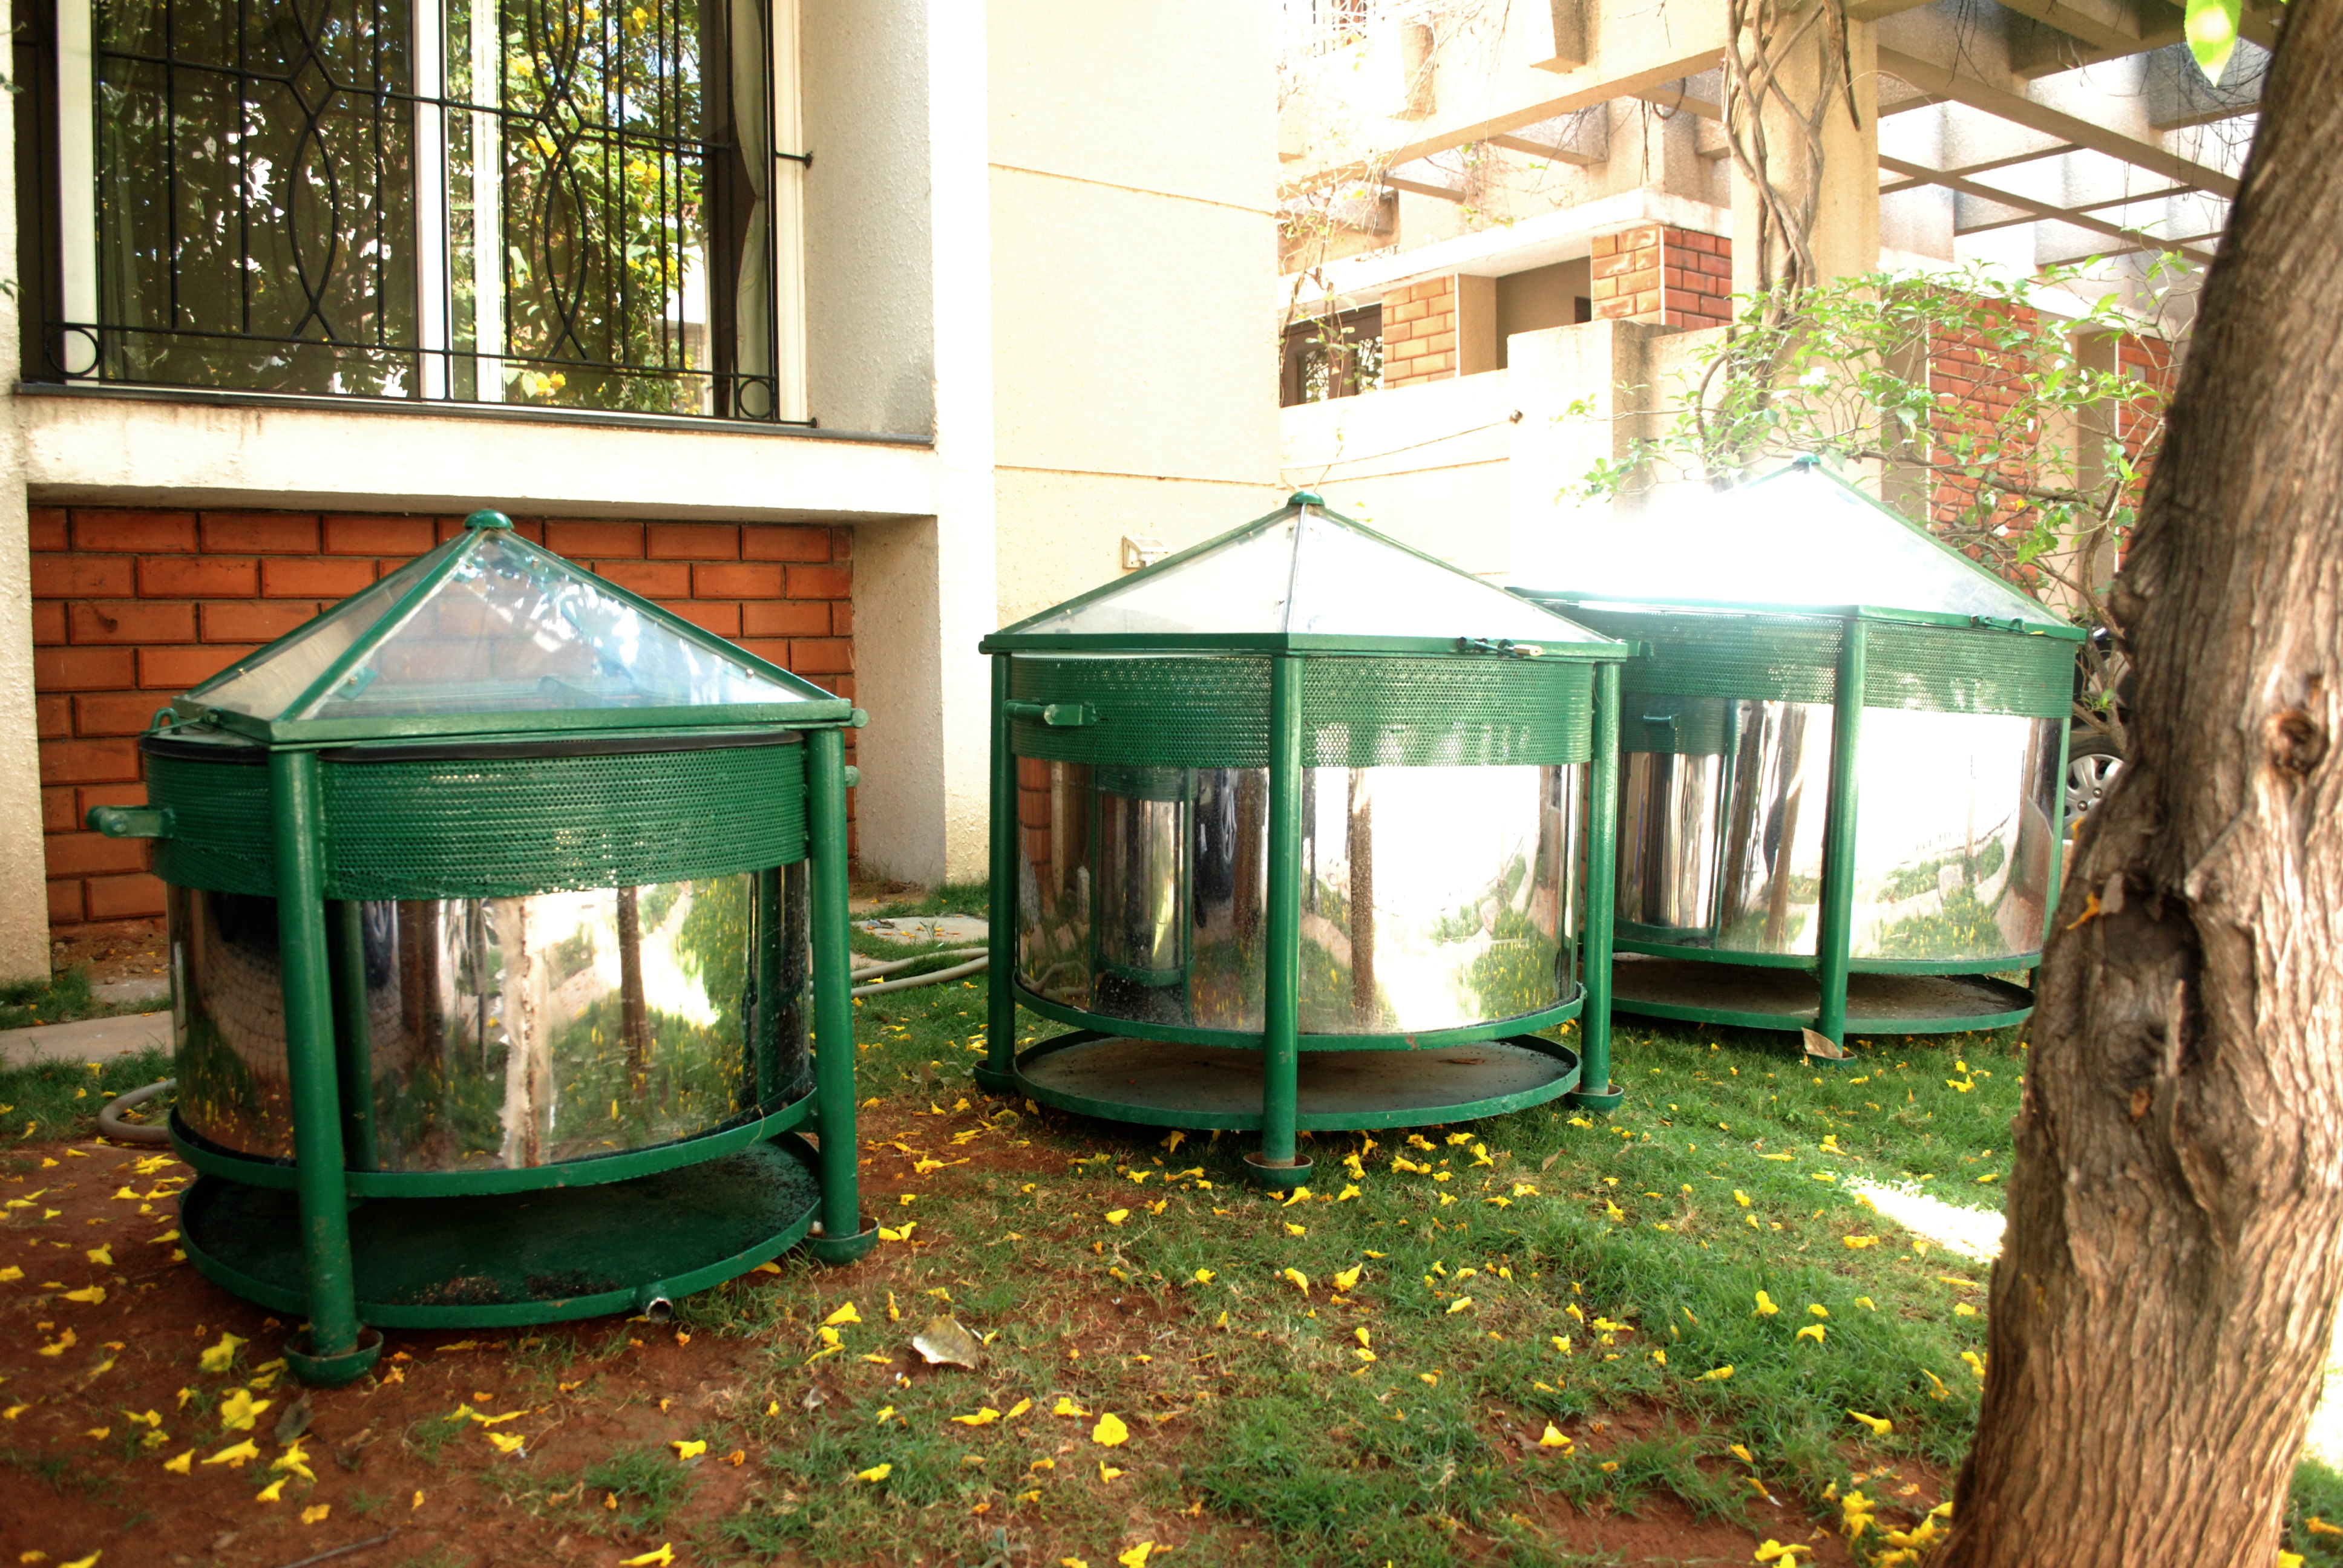 Marigol solar composter from Prudent Eco Systems, Bengaluru.